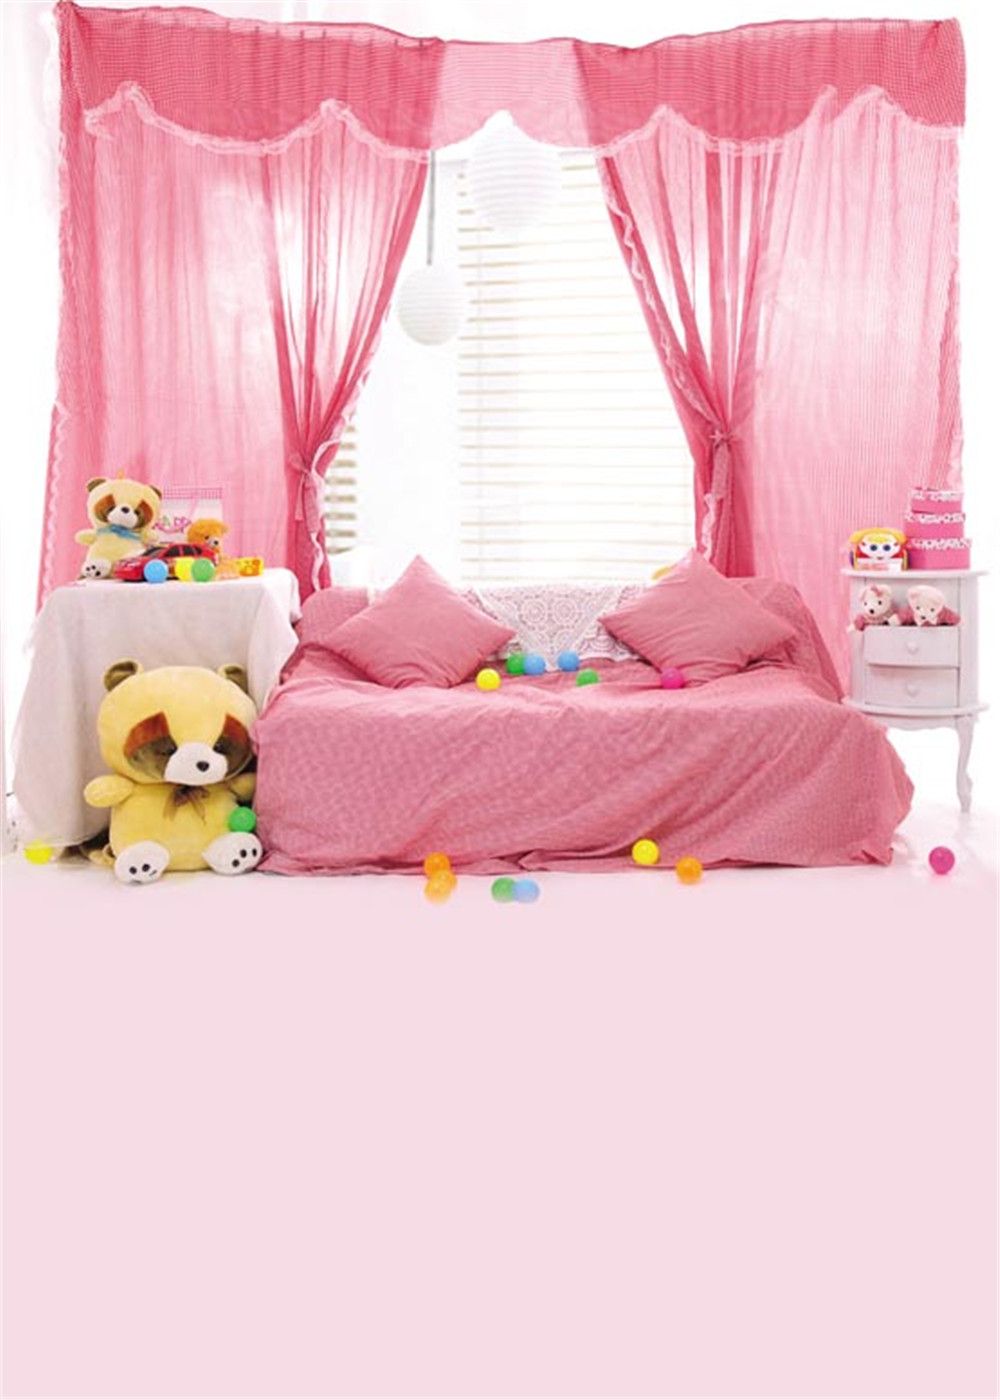 Indoor Room Pink Curtains Bed Photo Backdrop Bright Window Colorful Balls  Bear Toys Kids Children Photography Background Vinyl Cloth